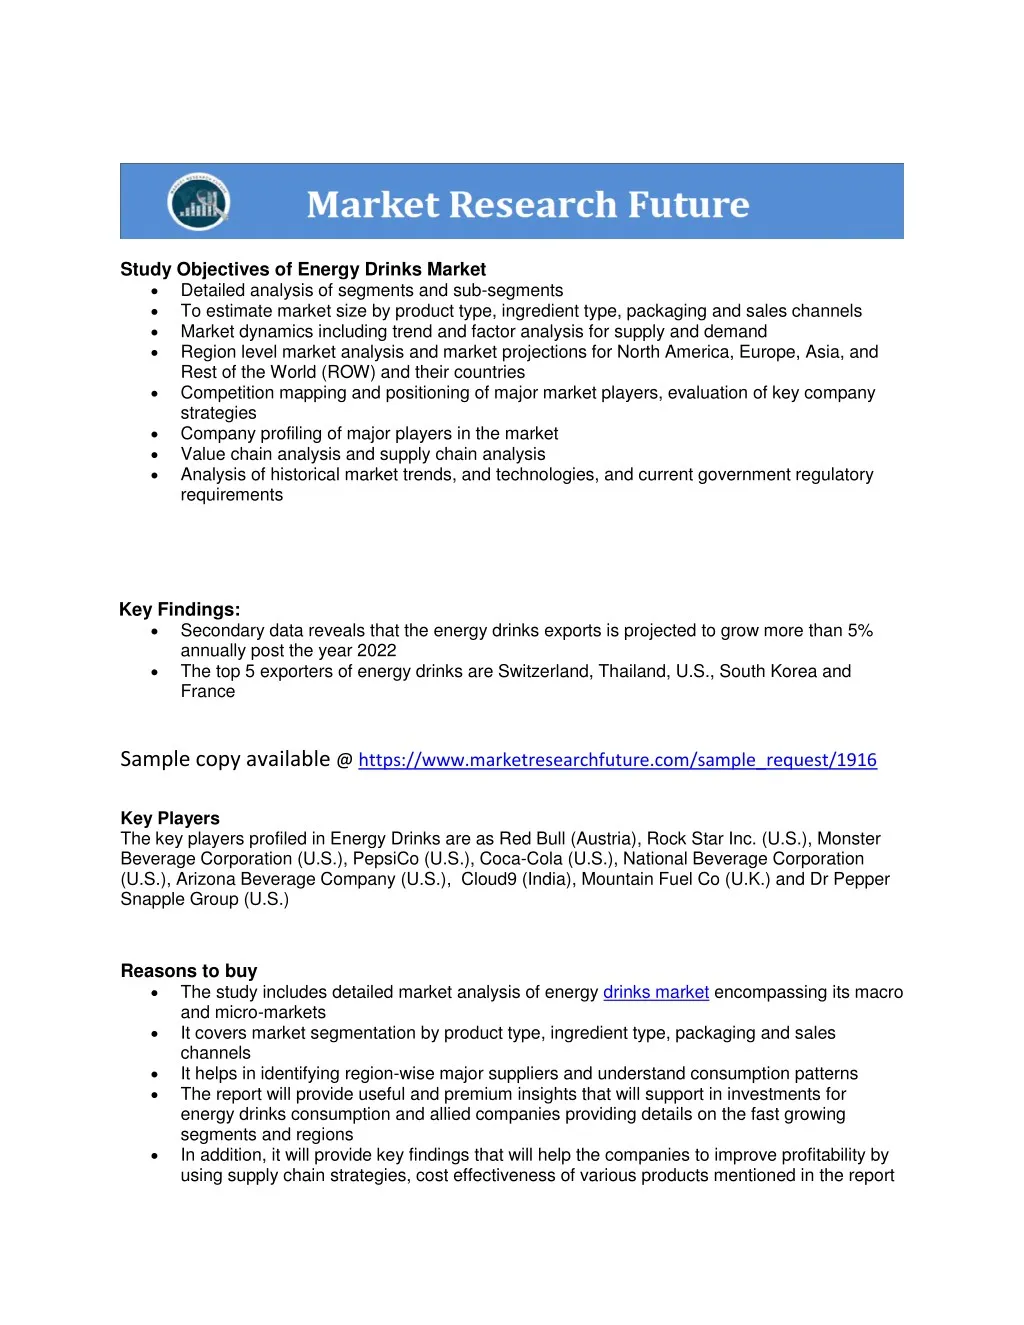 study objectives of energy drinks market detailed